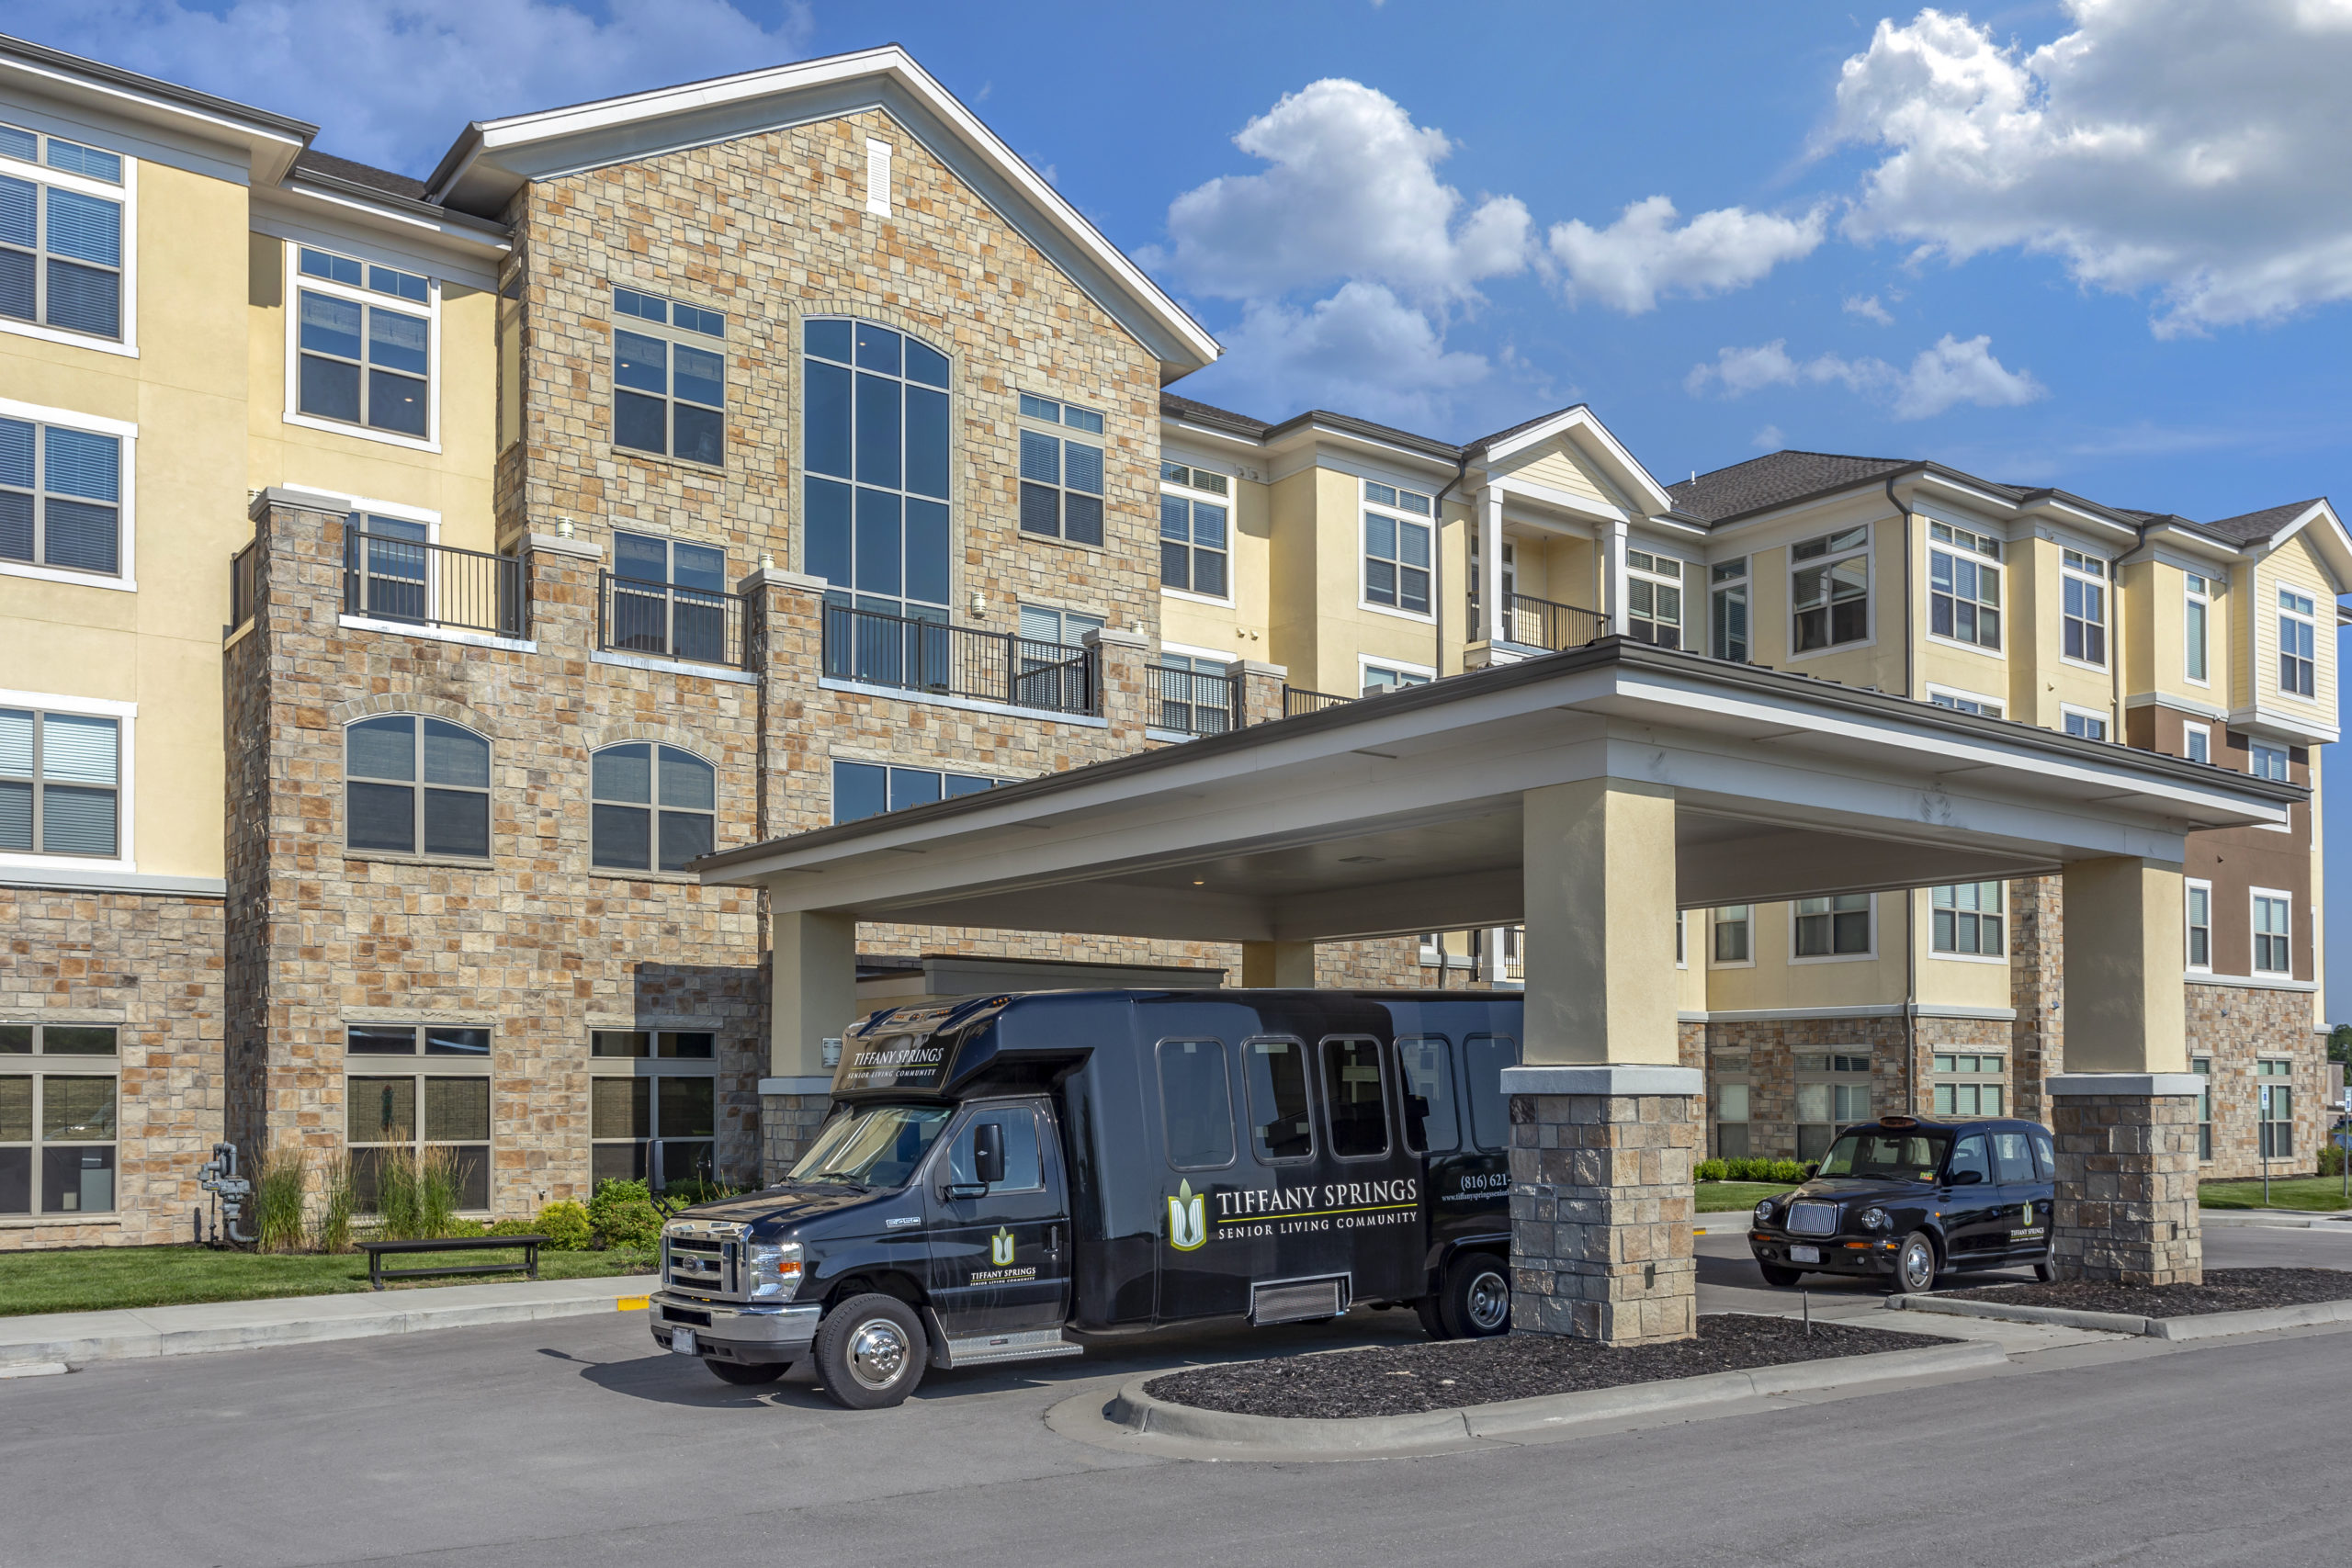 Tiffany Springs Senior Living exterior with transportation vehicles parked in front